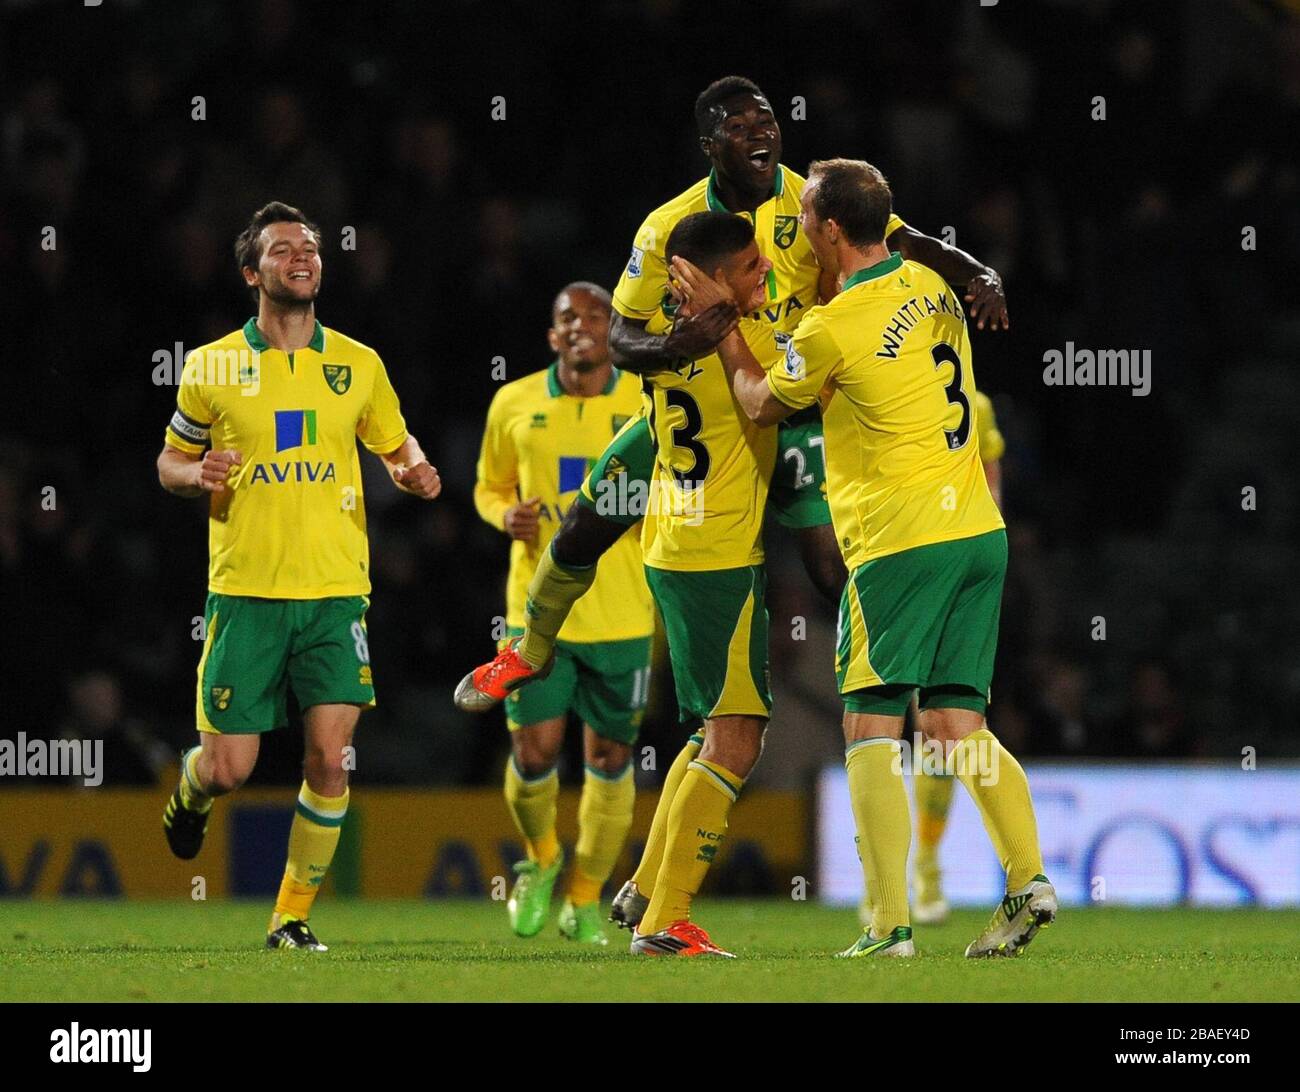 Norwich City's players celebrate their equalising goal after a shot by Alex Tettey (2nd right) was deflected in by Tottenham Hotspur's Jan Vertonghen. Stock Photo